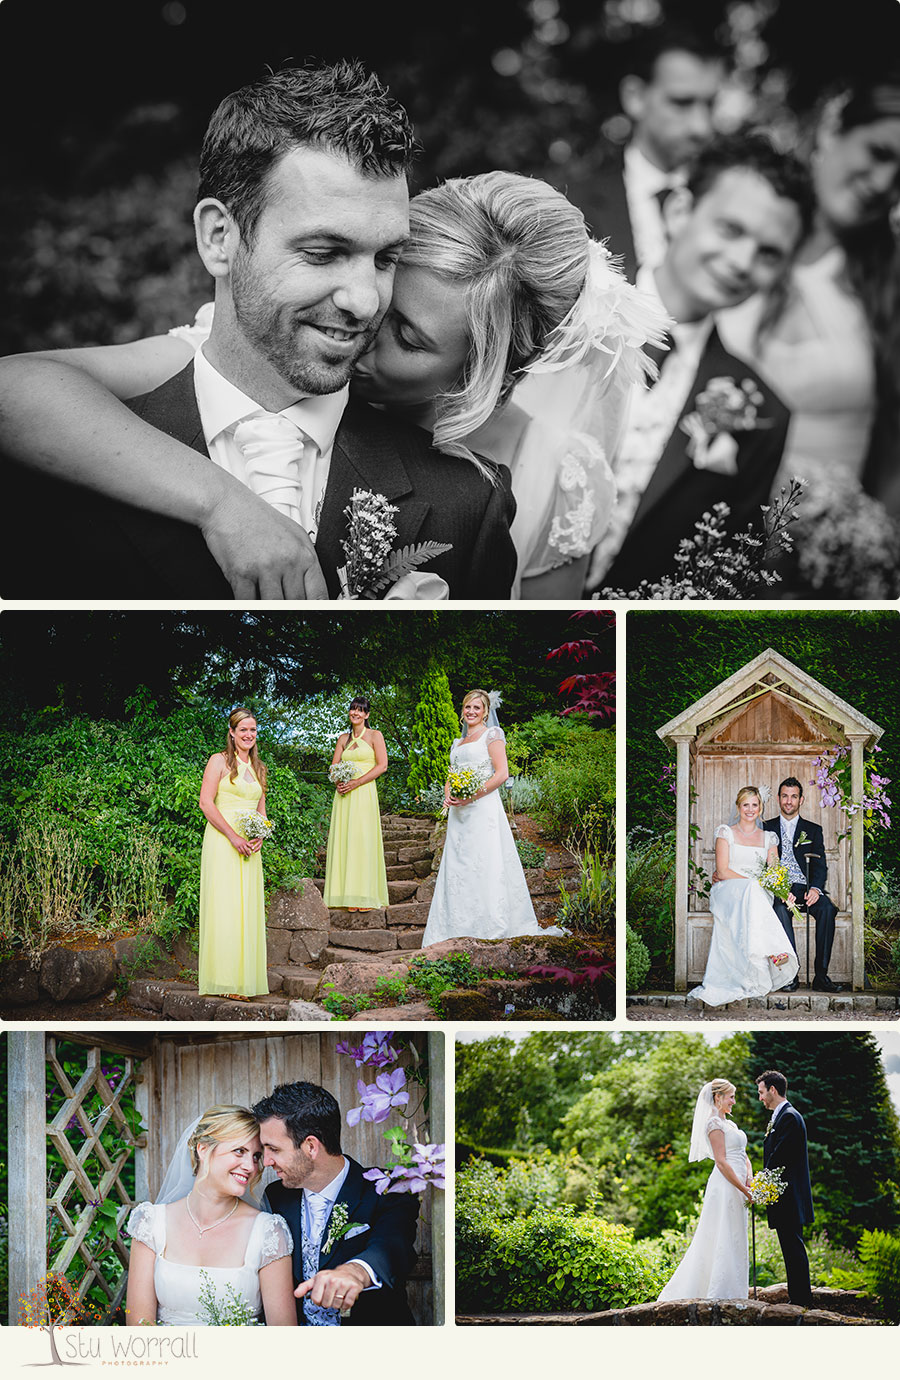 2013 Wedding Photography Review. A very good year » Stu Worrall ...